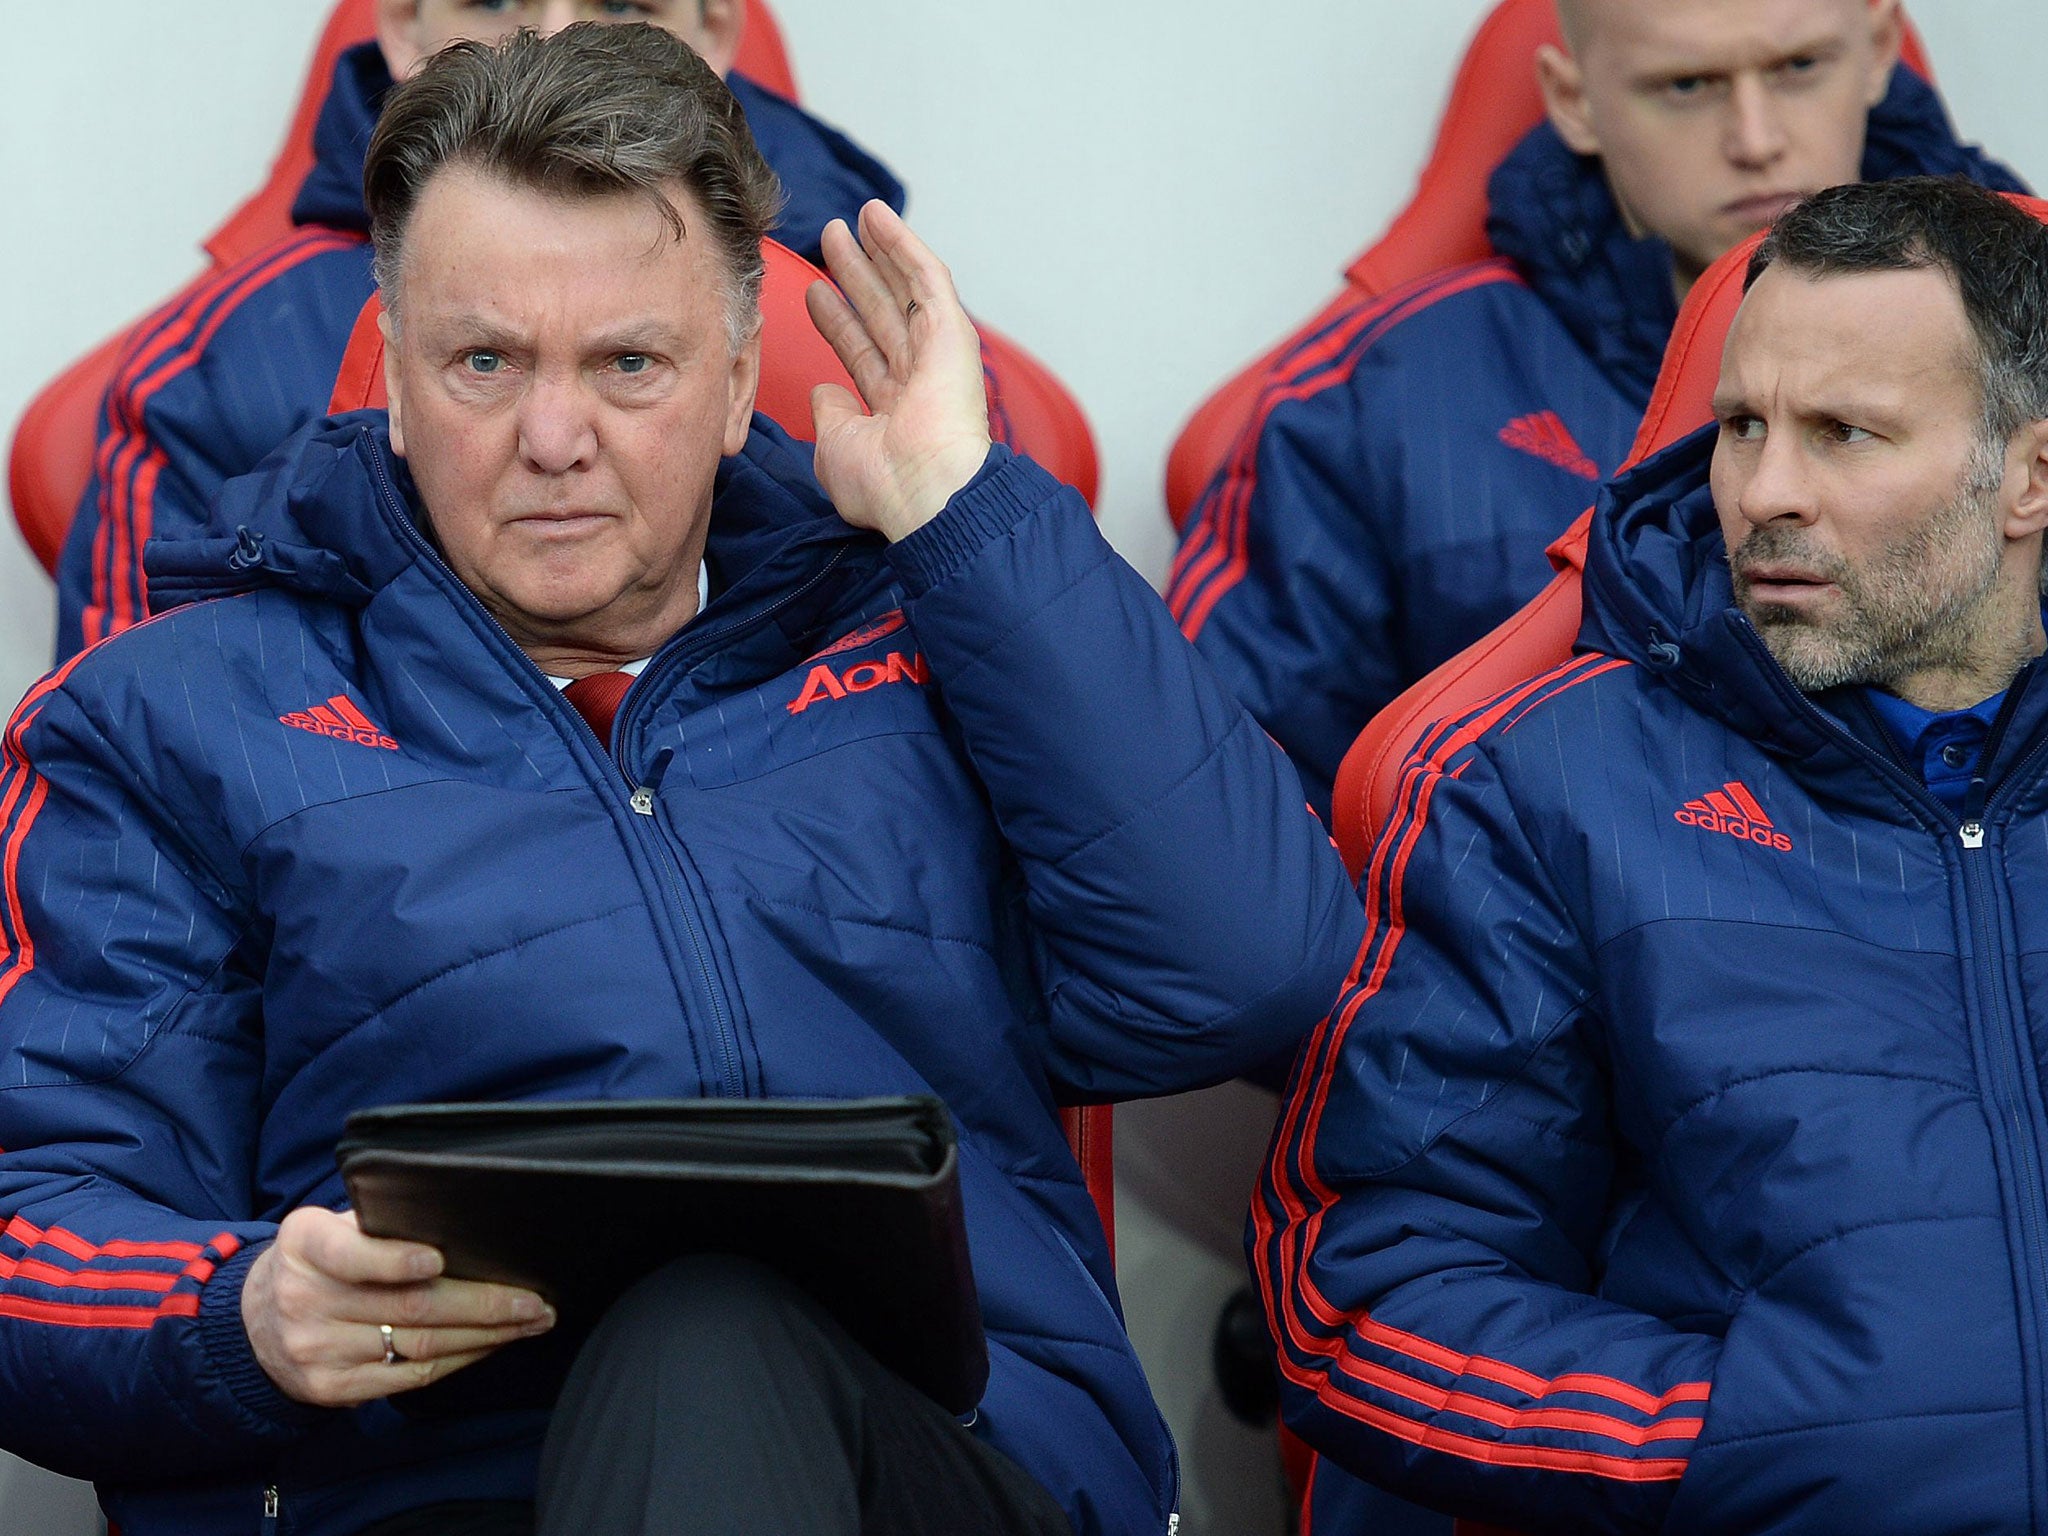 Louis van Gaal believes it will be 'very hard' for Manchester United to qualify for the Champions League next season